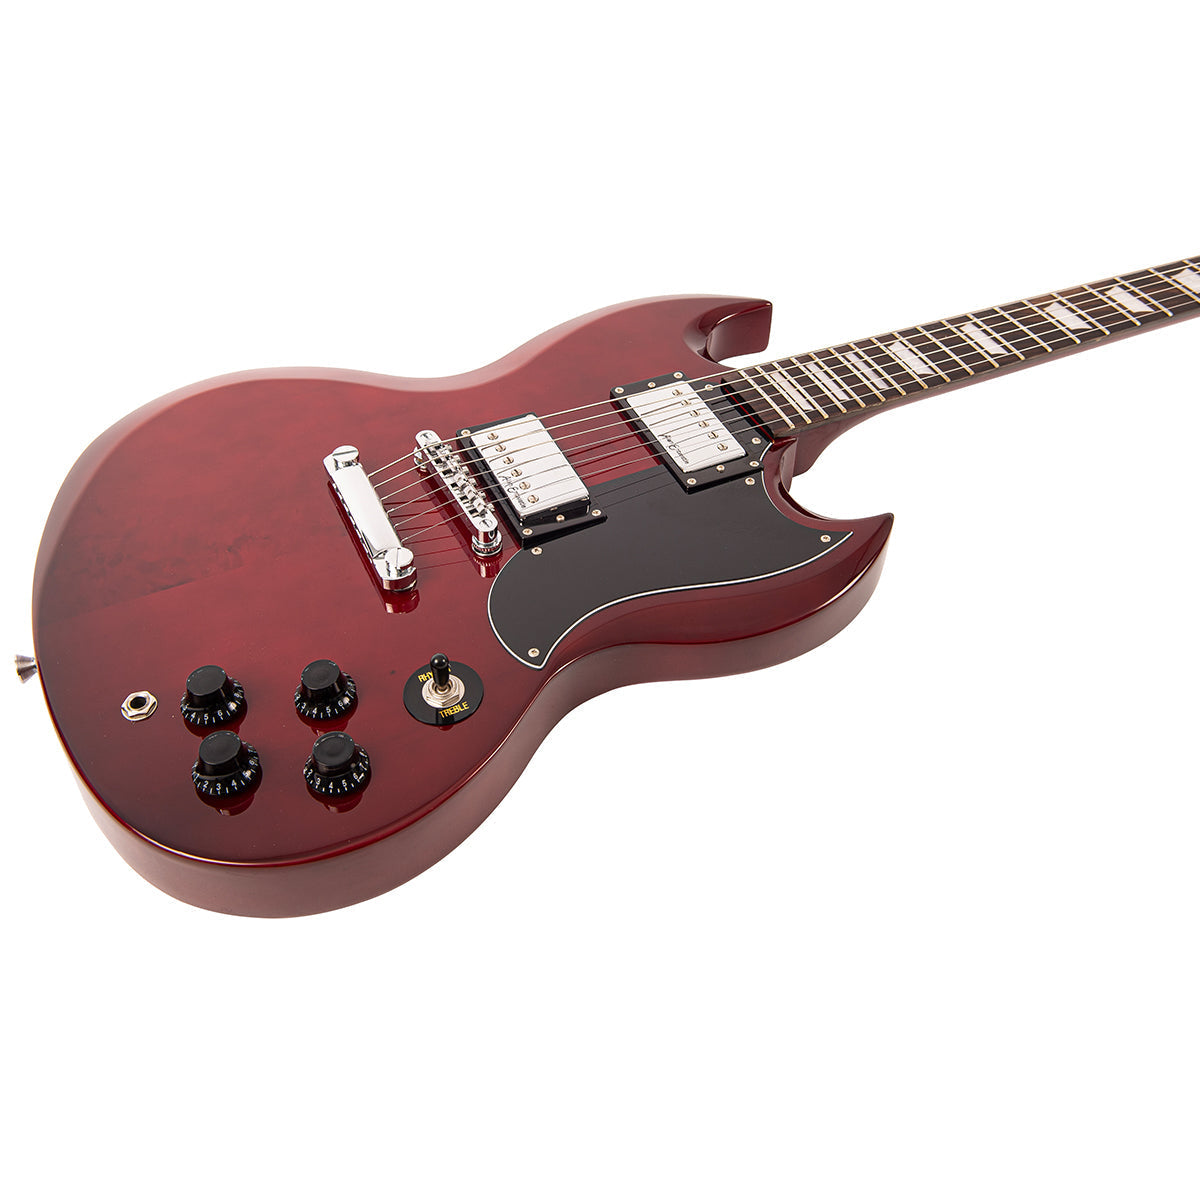 Vintage V69 Coaster Series Electric Guitar Pack ~ Cherry Red, Electric Guitar for sale at Richards Guitars.